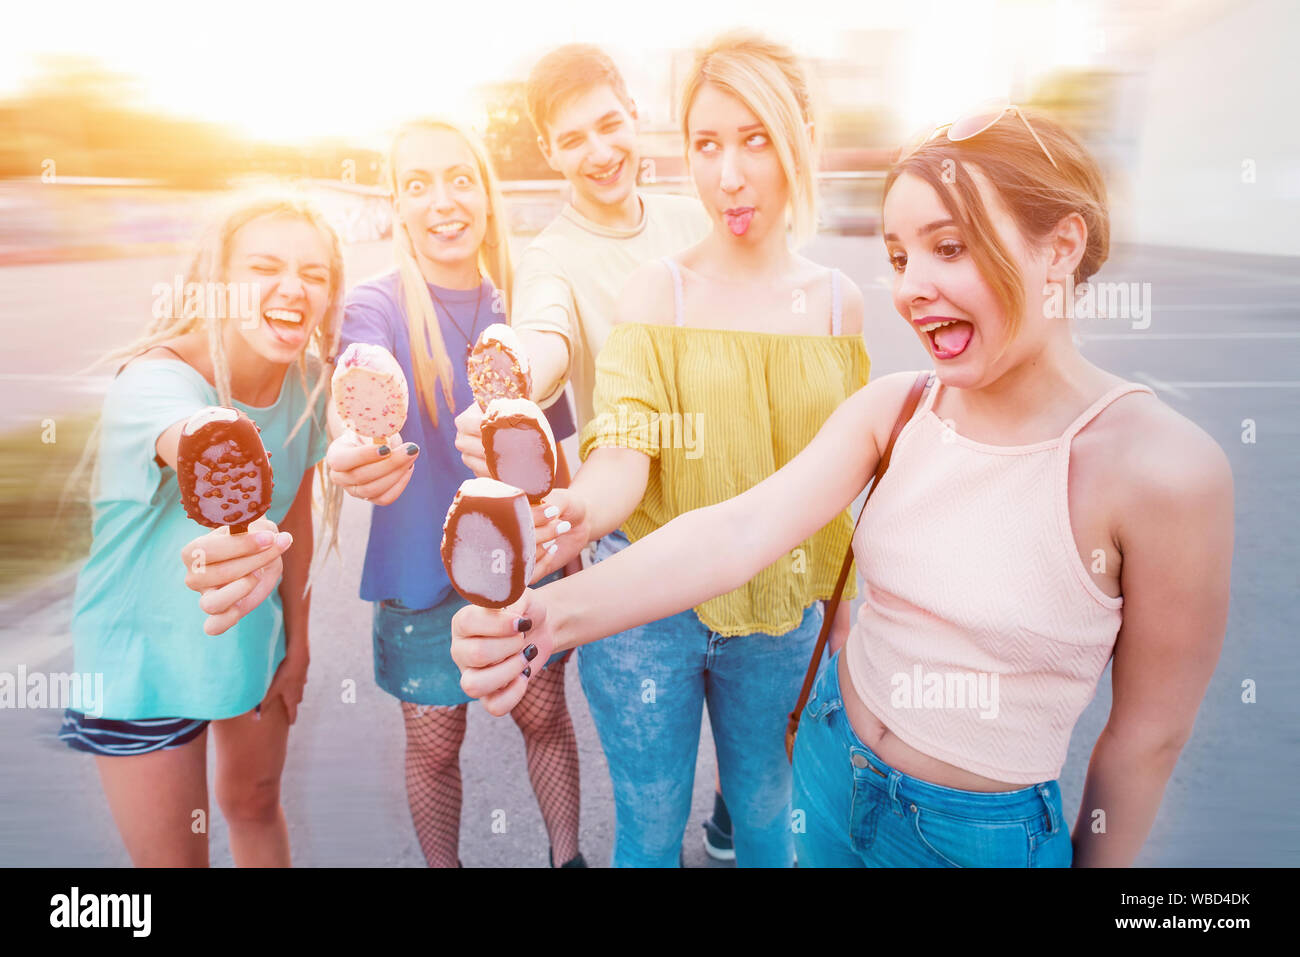 Friends making funny faces and eating ice cream Stock Photo